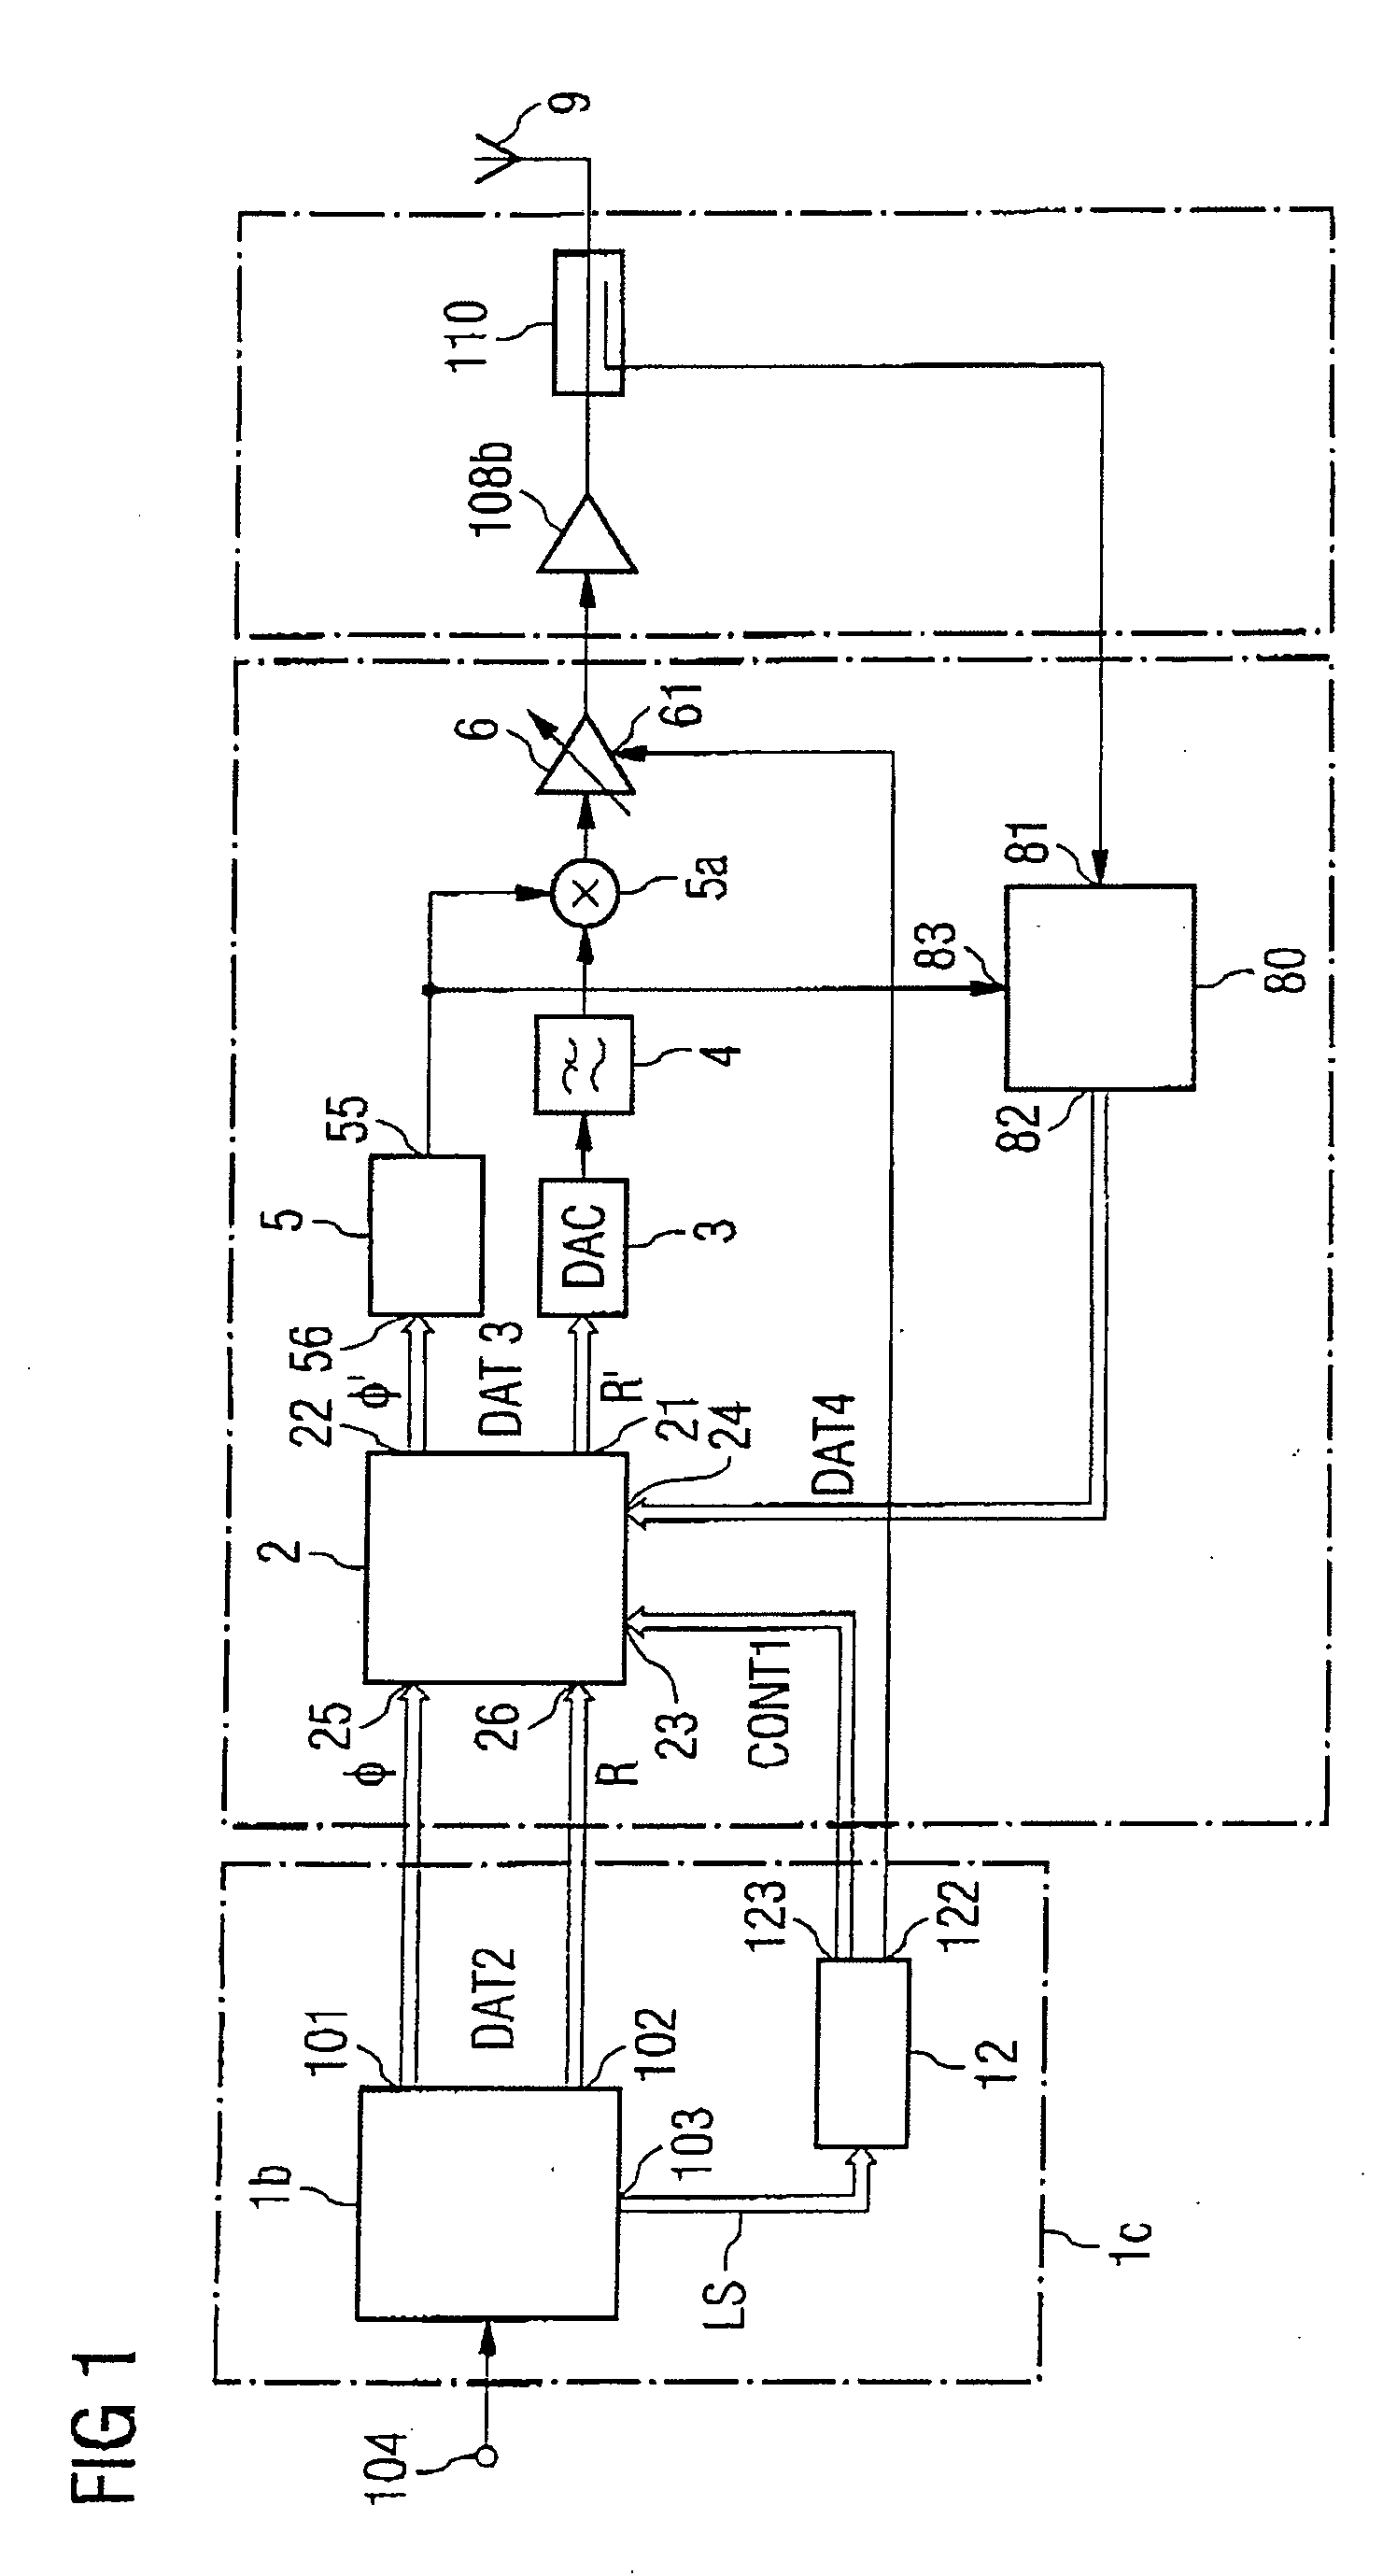 Method for predistortion of a signal, and a transmitting device having digital predistortion, in particular for mobile radio